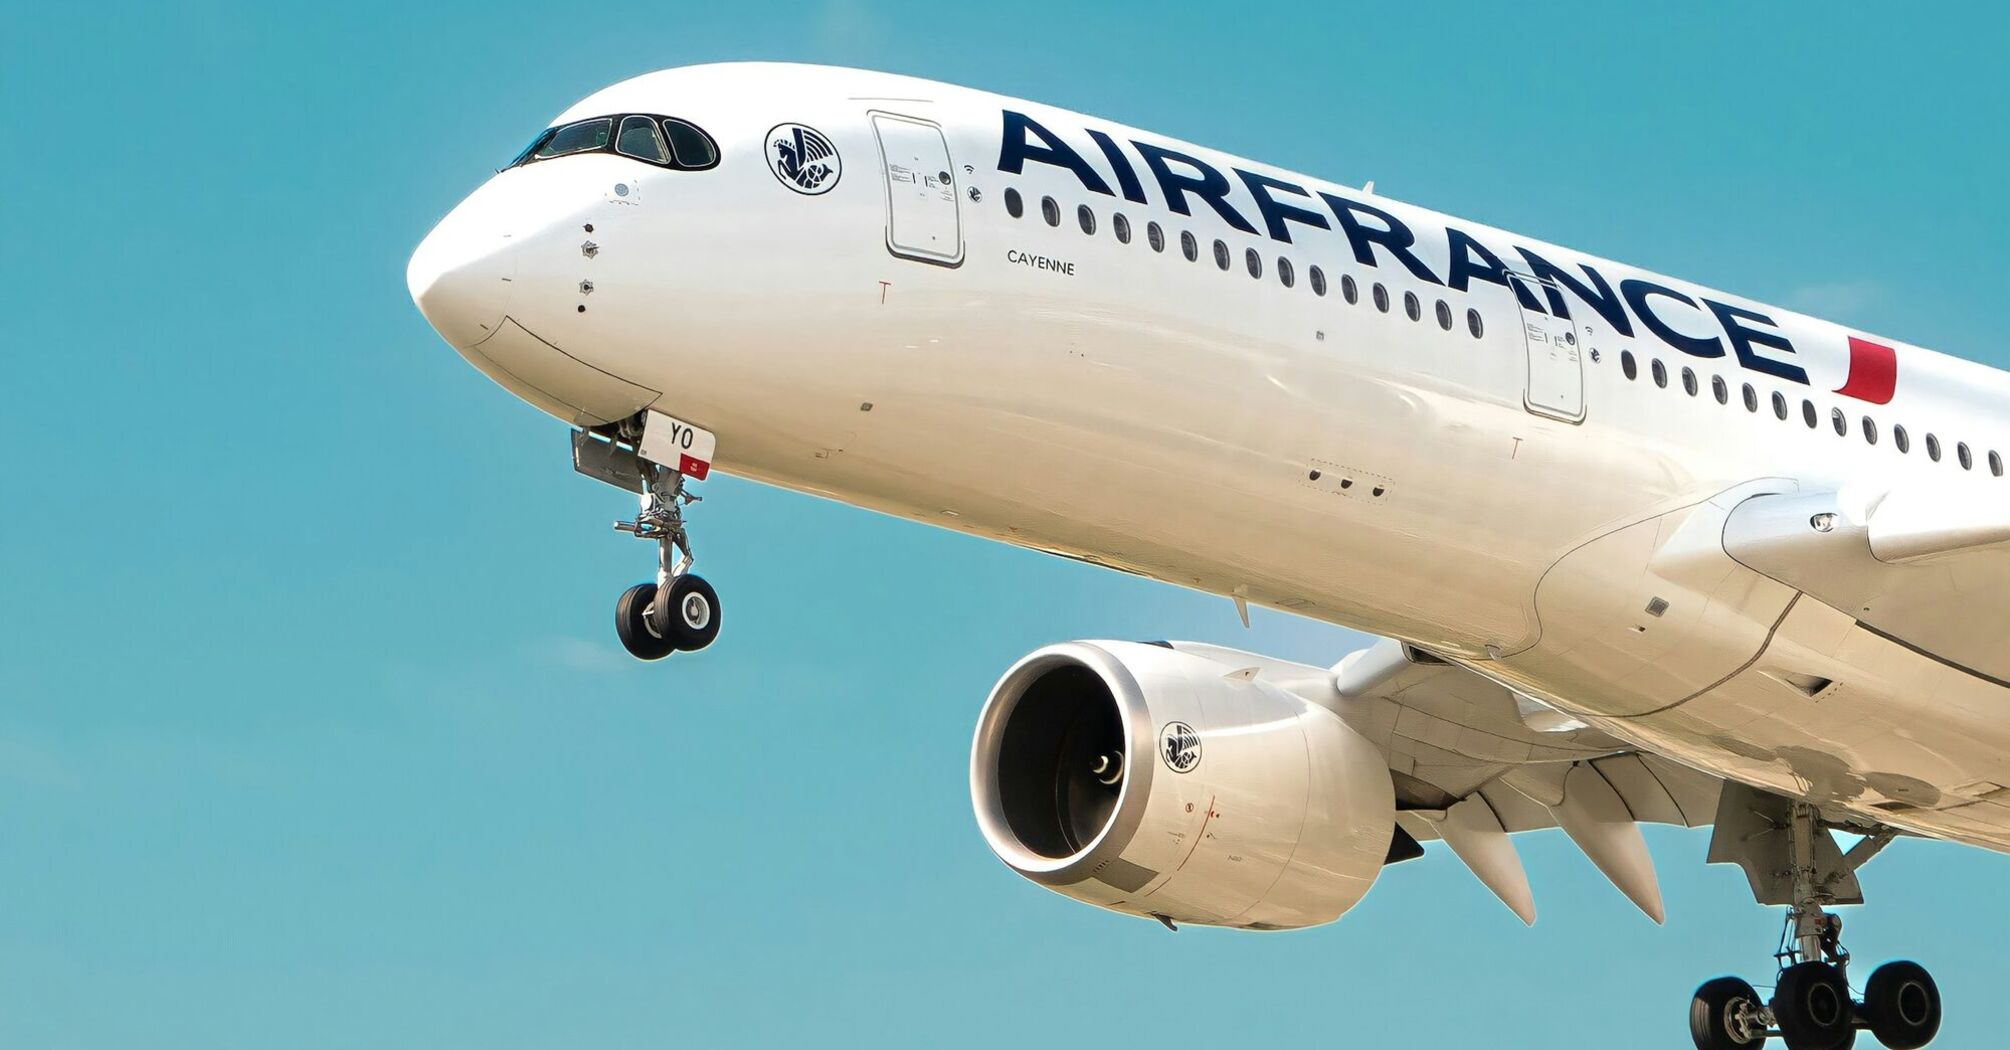 Air France airplane in flight with landing gear down